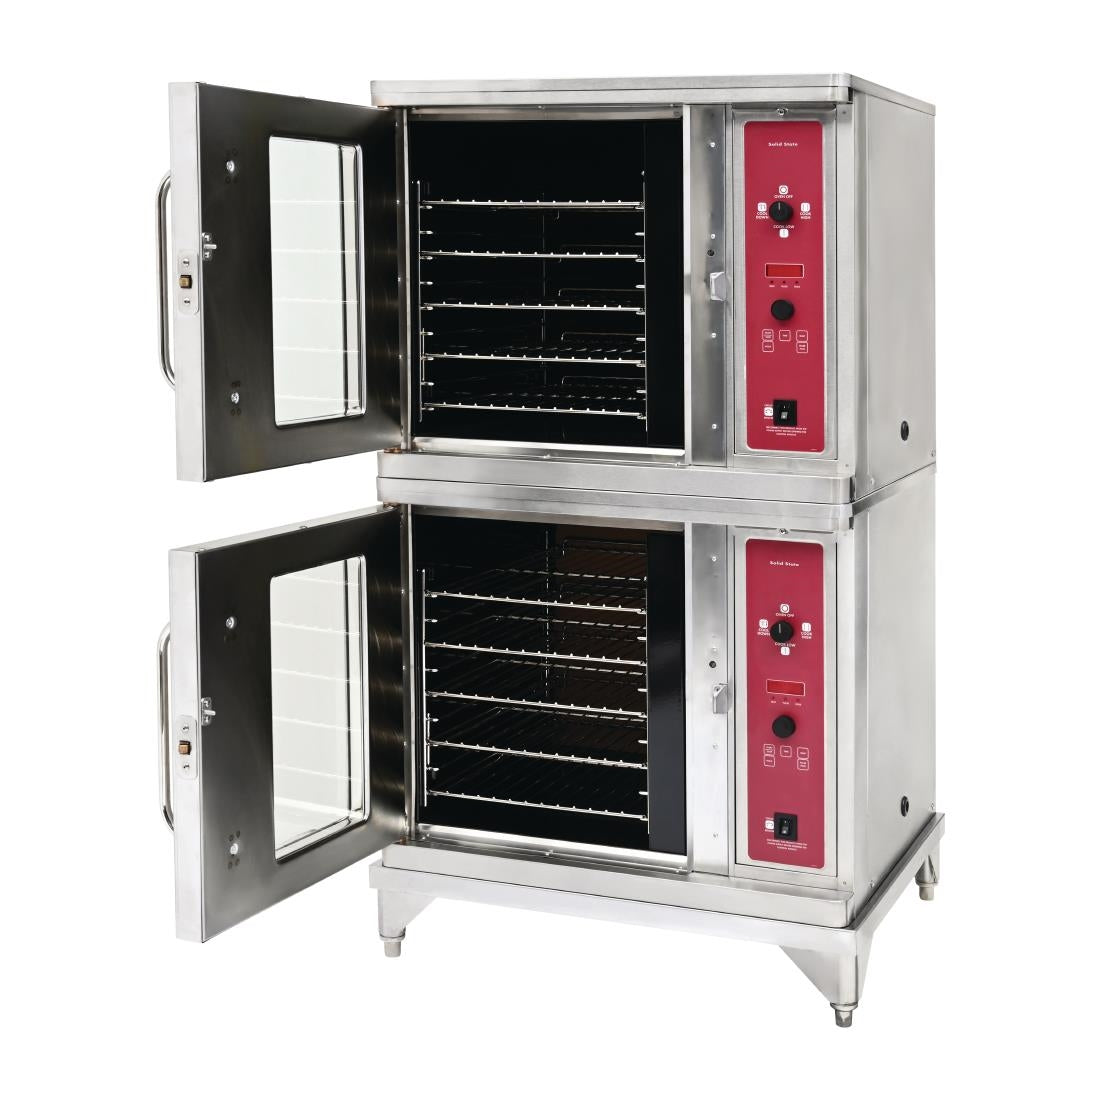 FP875 Blodgett Half Size Double Stacked Convection Oven CTB-2 JD Catering Equipment Solutions Ltd